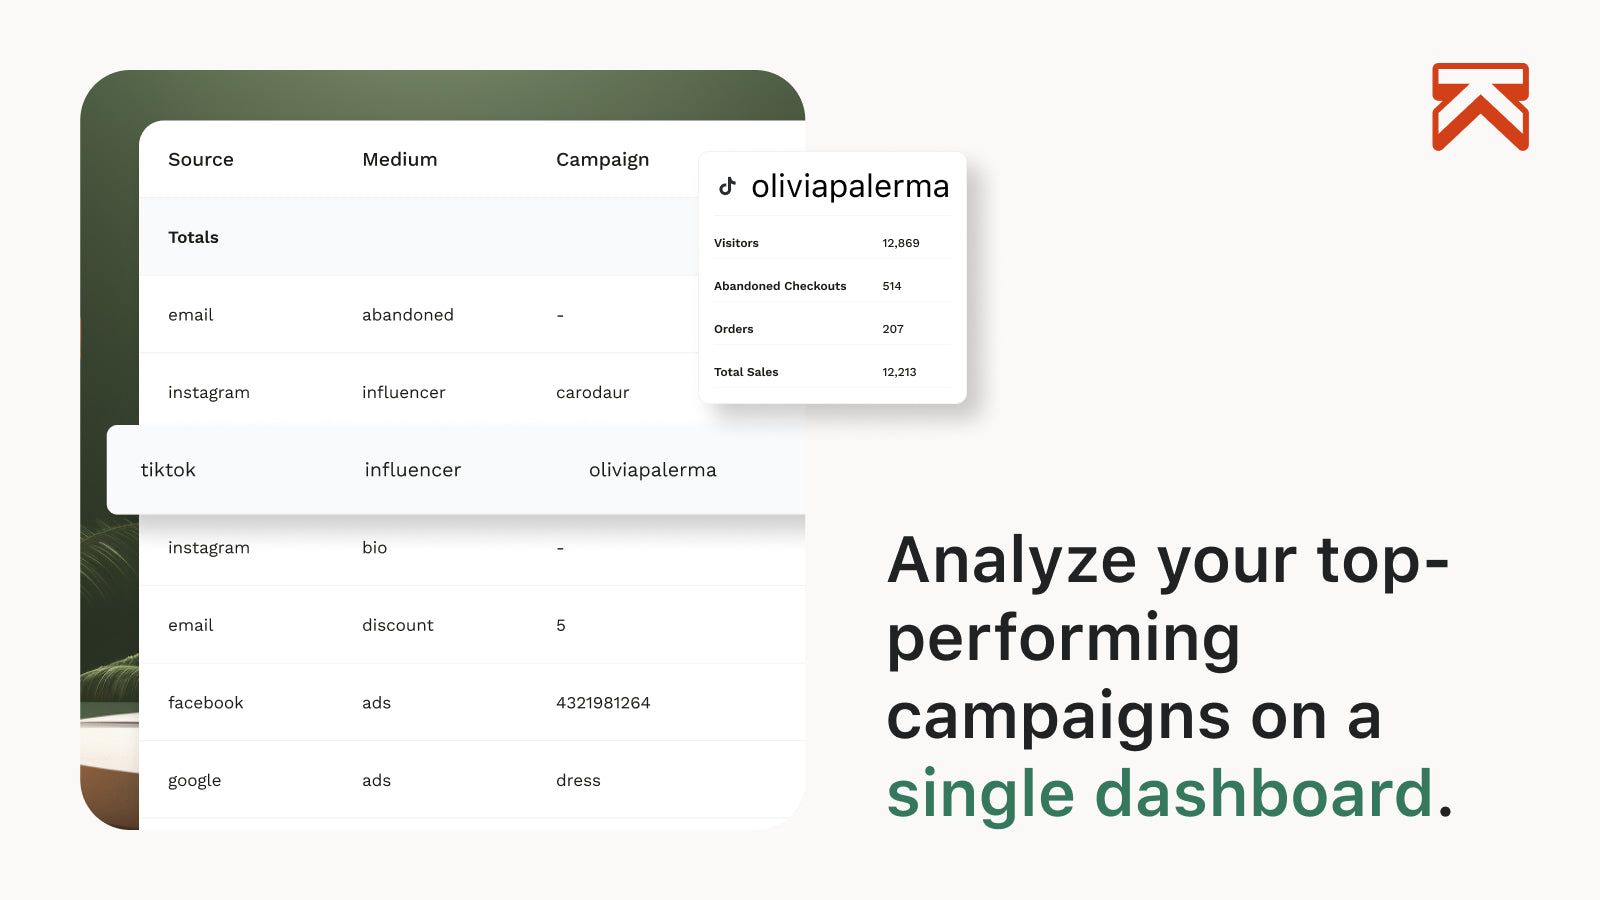 Analyze your top-performing campaigns on a single dashboard.